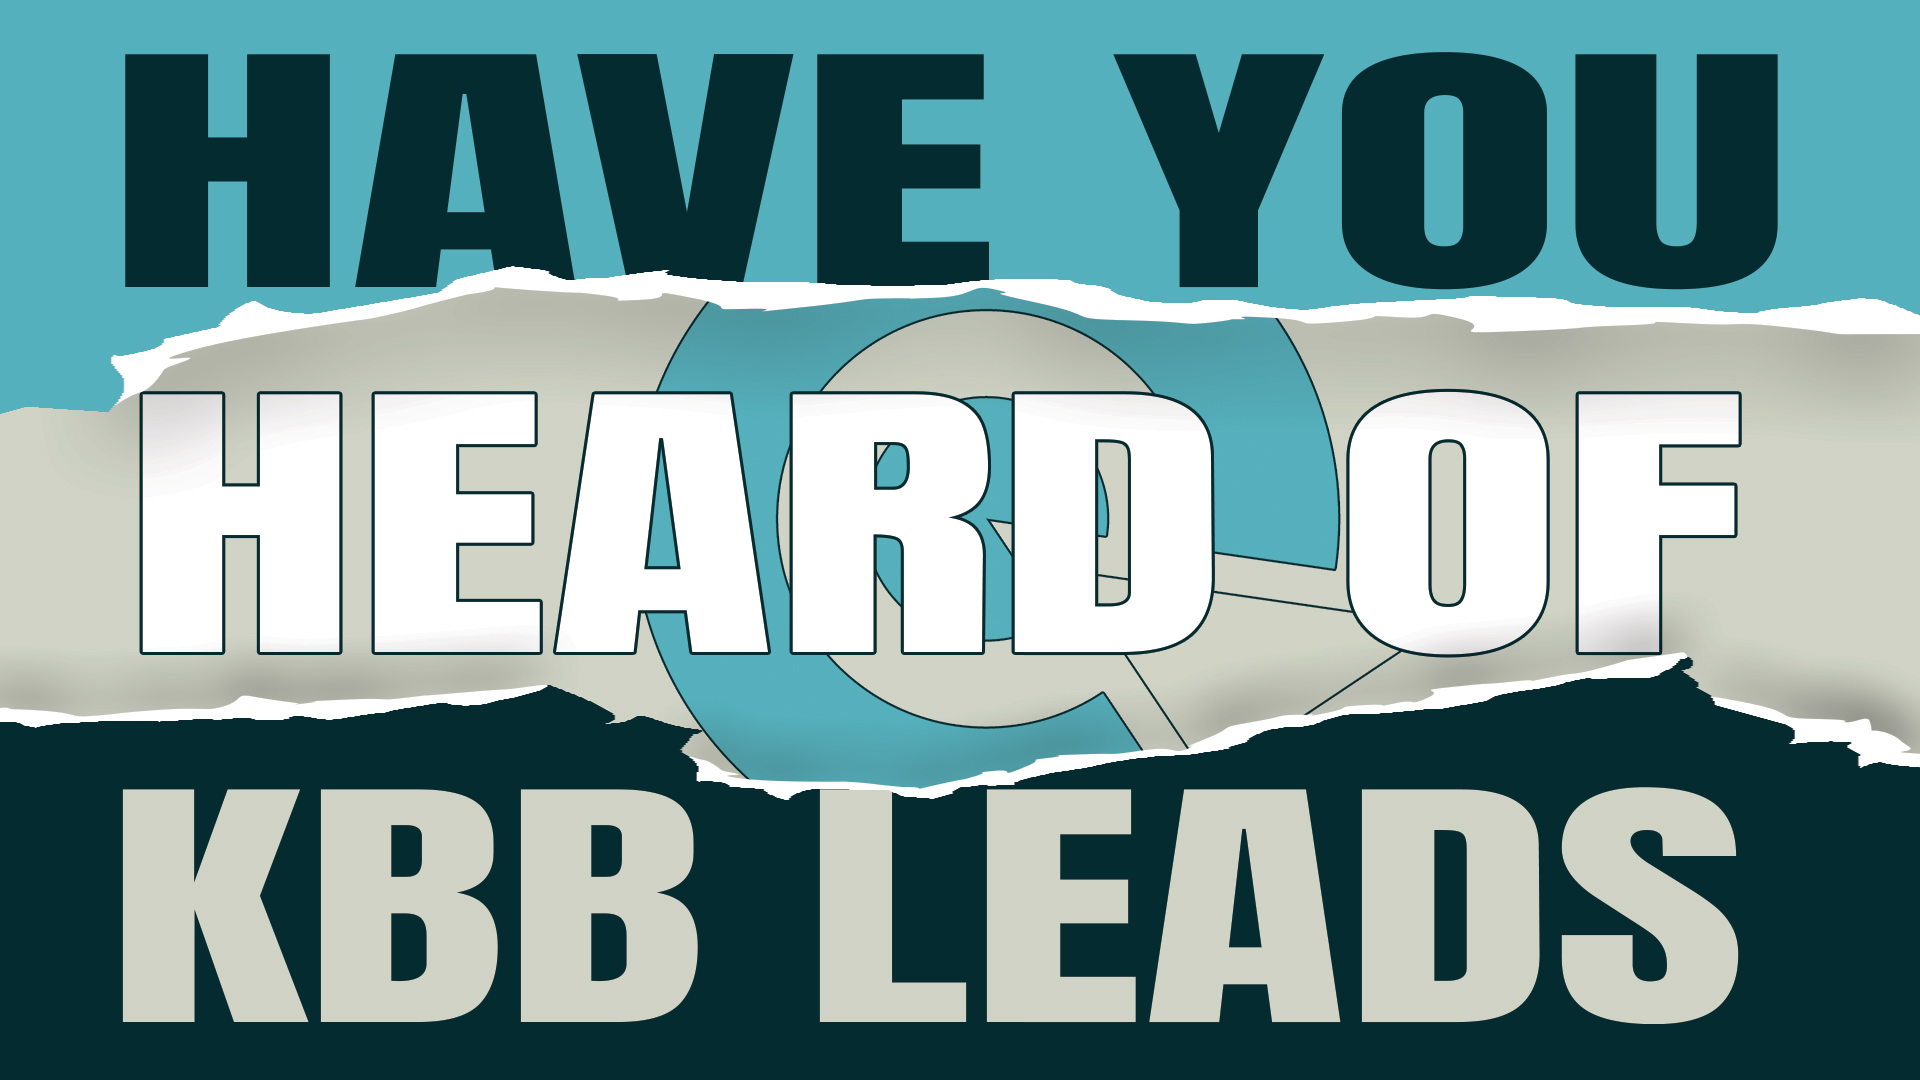 Have you heard of KBB Leads?